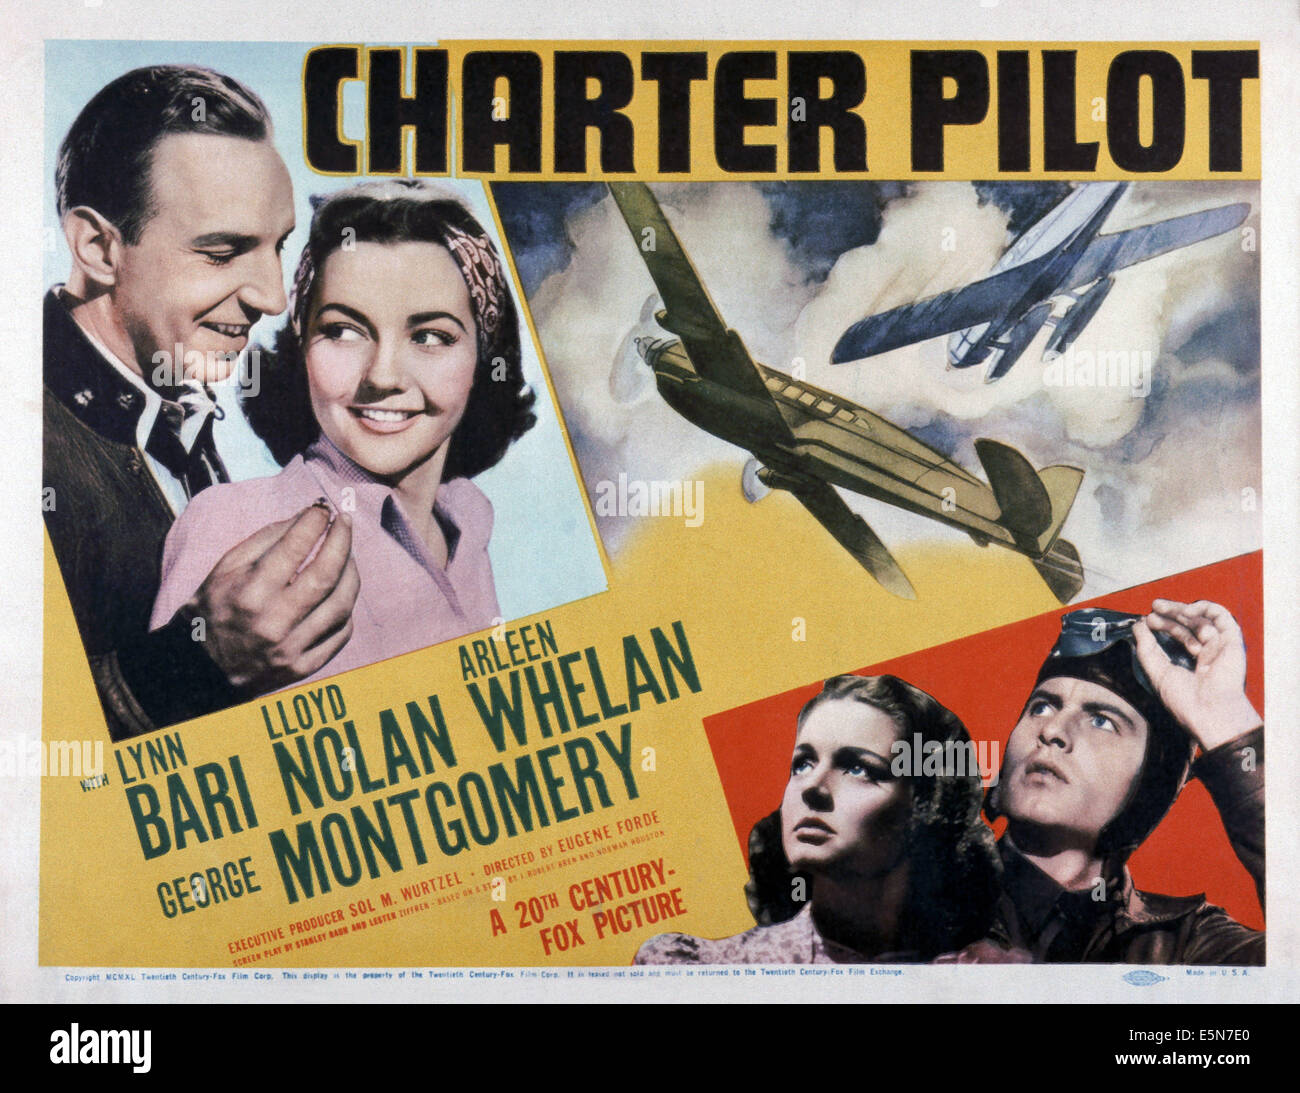 Image result for charter pilot movie